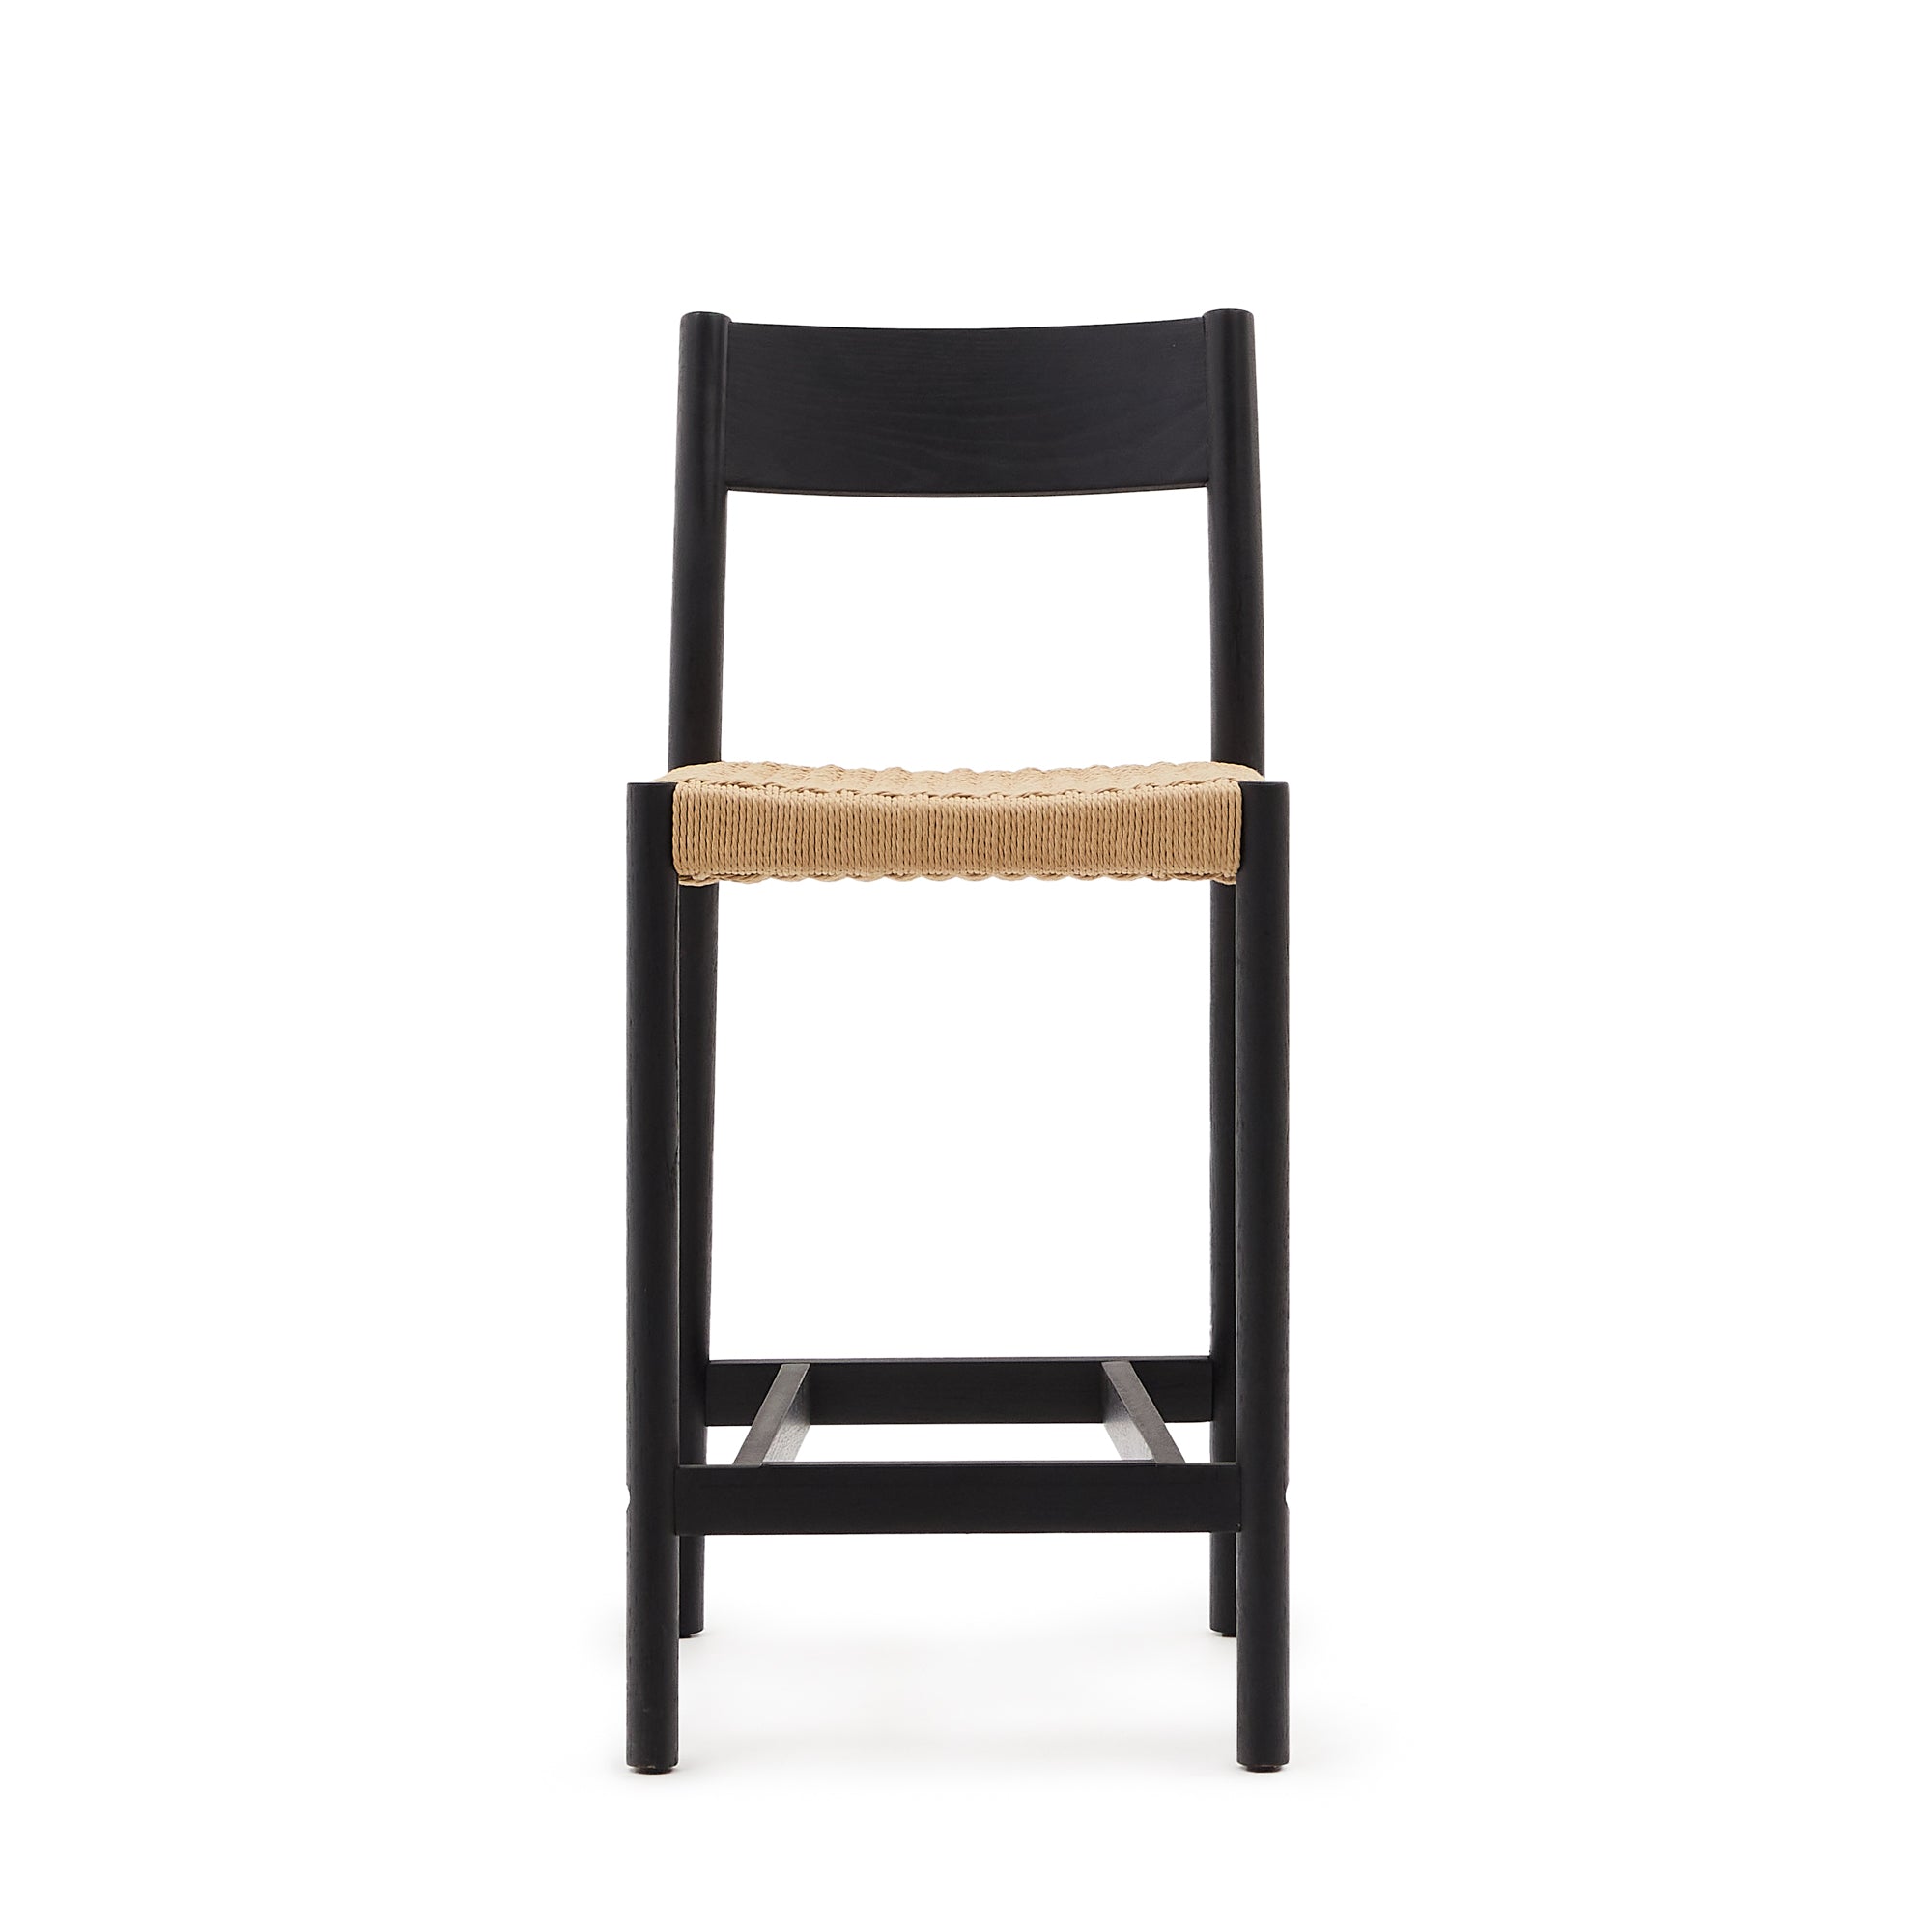 Yalia chair with back, solid oak with black finish and rope seat, 65 cm 100% FSC